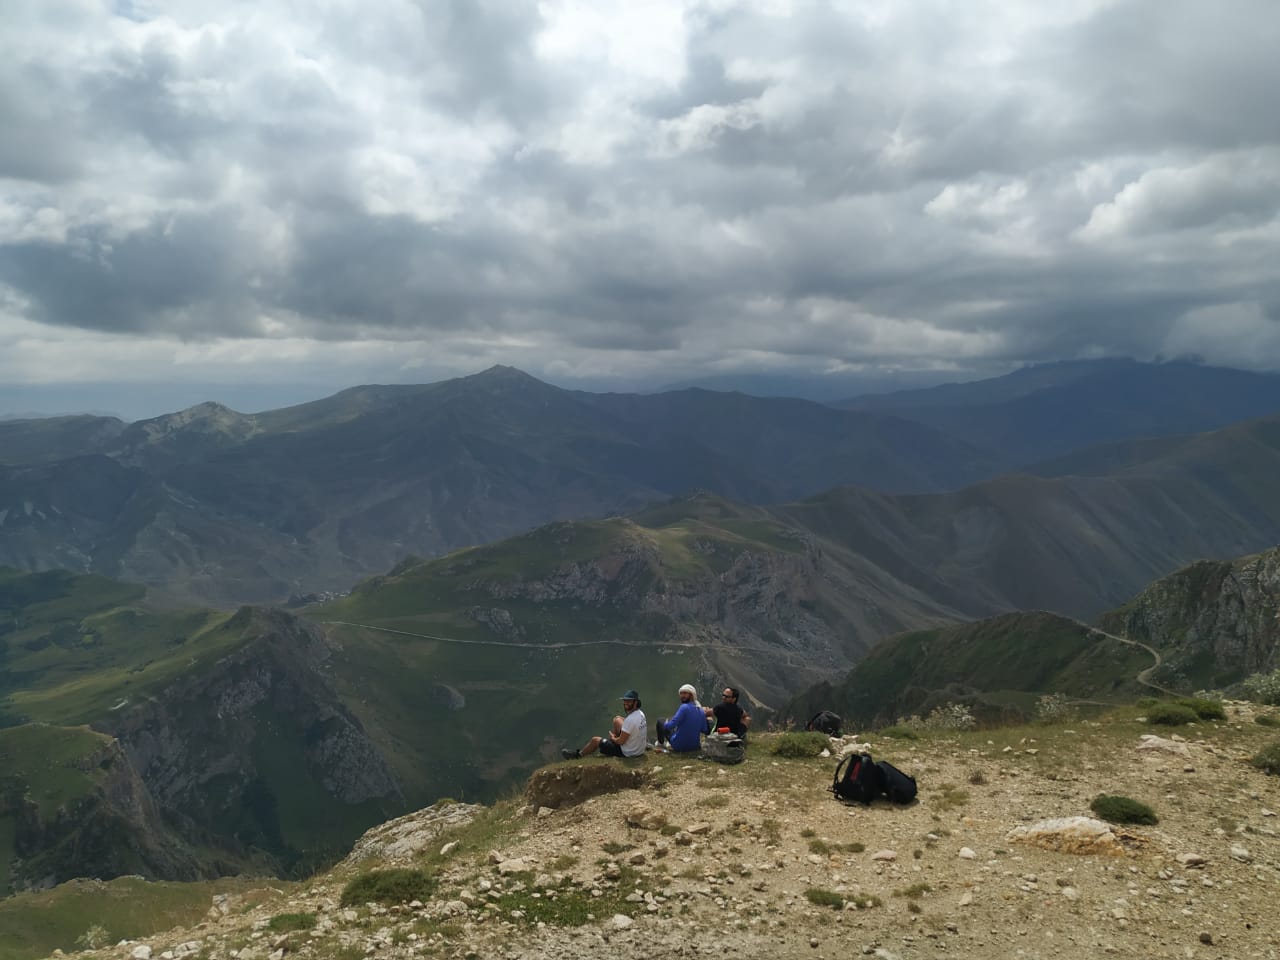 Shahdagh (4243 m.) mountain climbing with acclimitization in the local villages